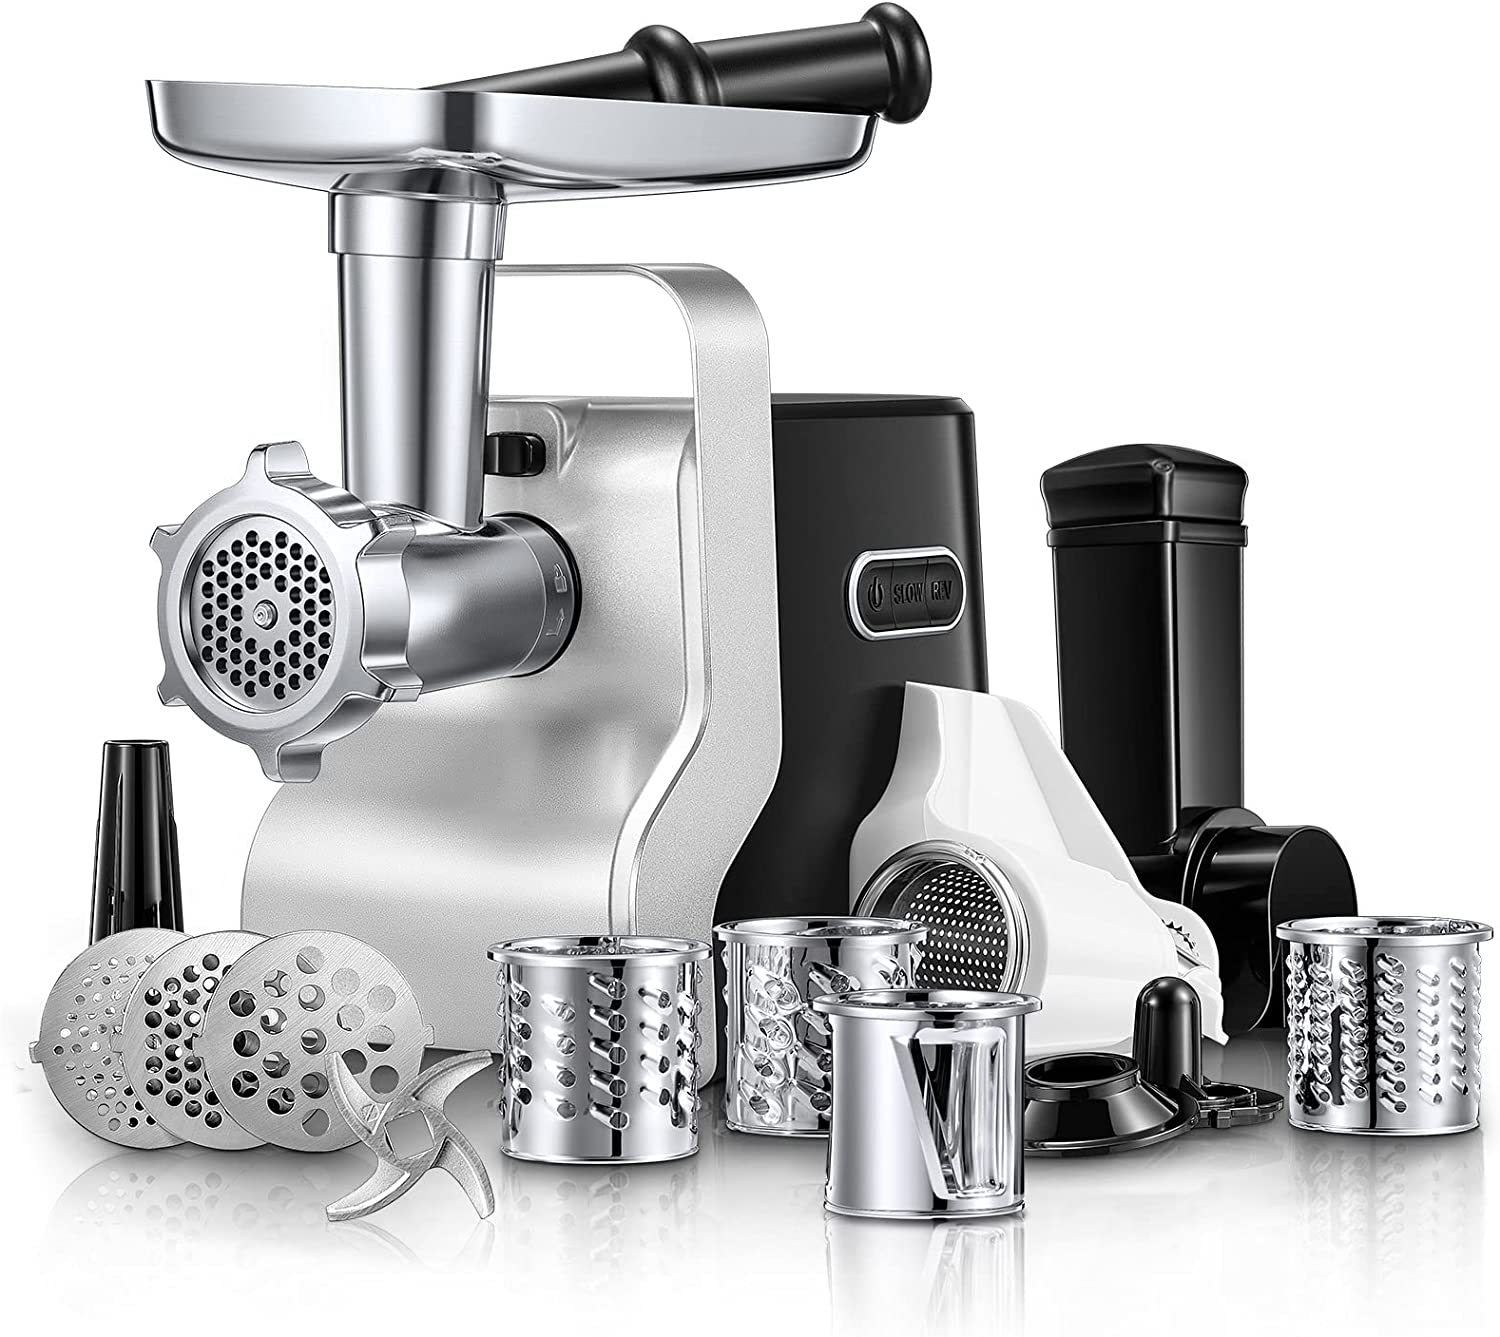 Electric Meat Grinder Heavy Duty - 5 in 1 2500W Max Powerful Home